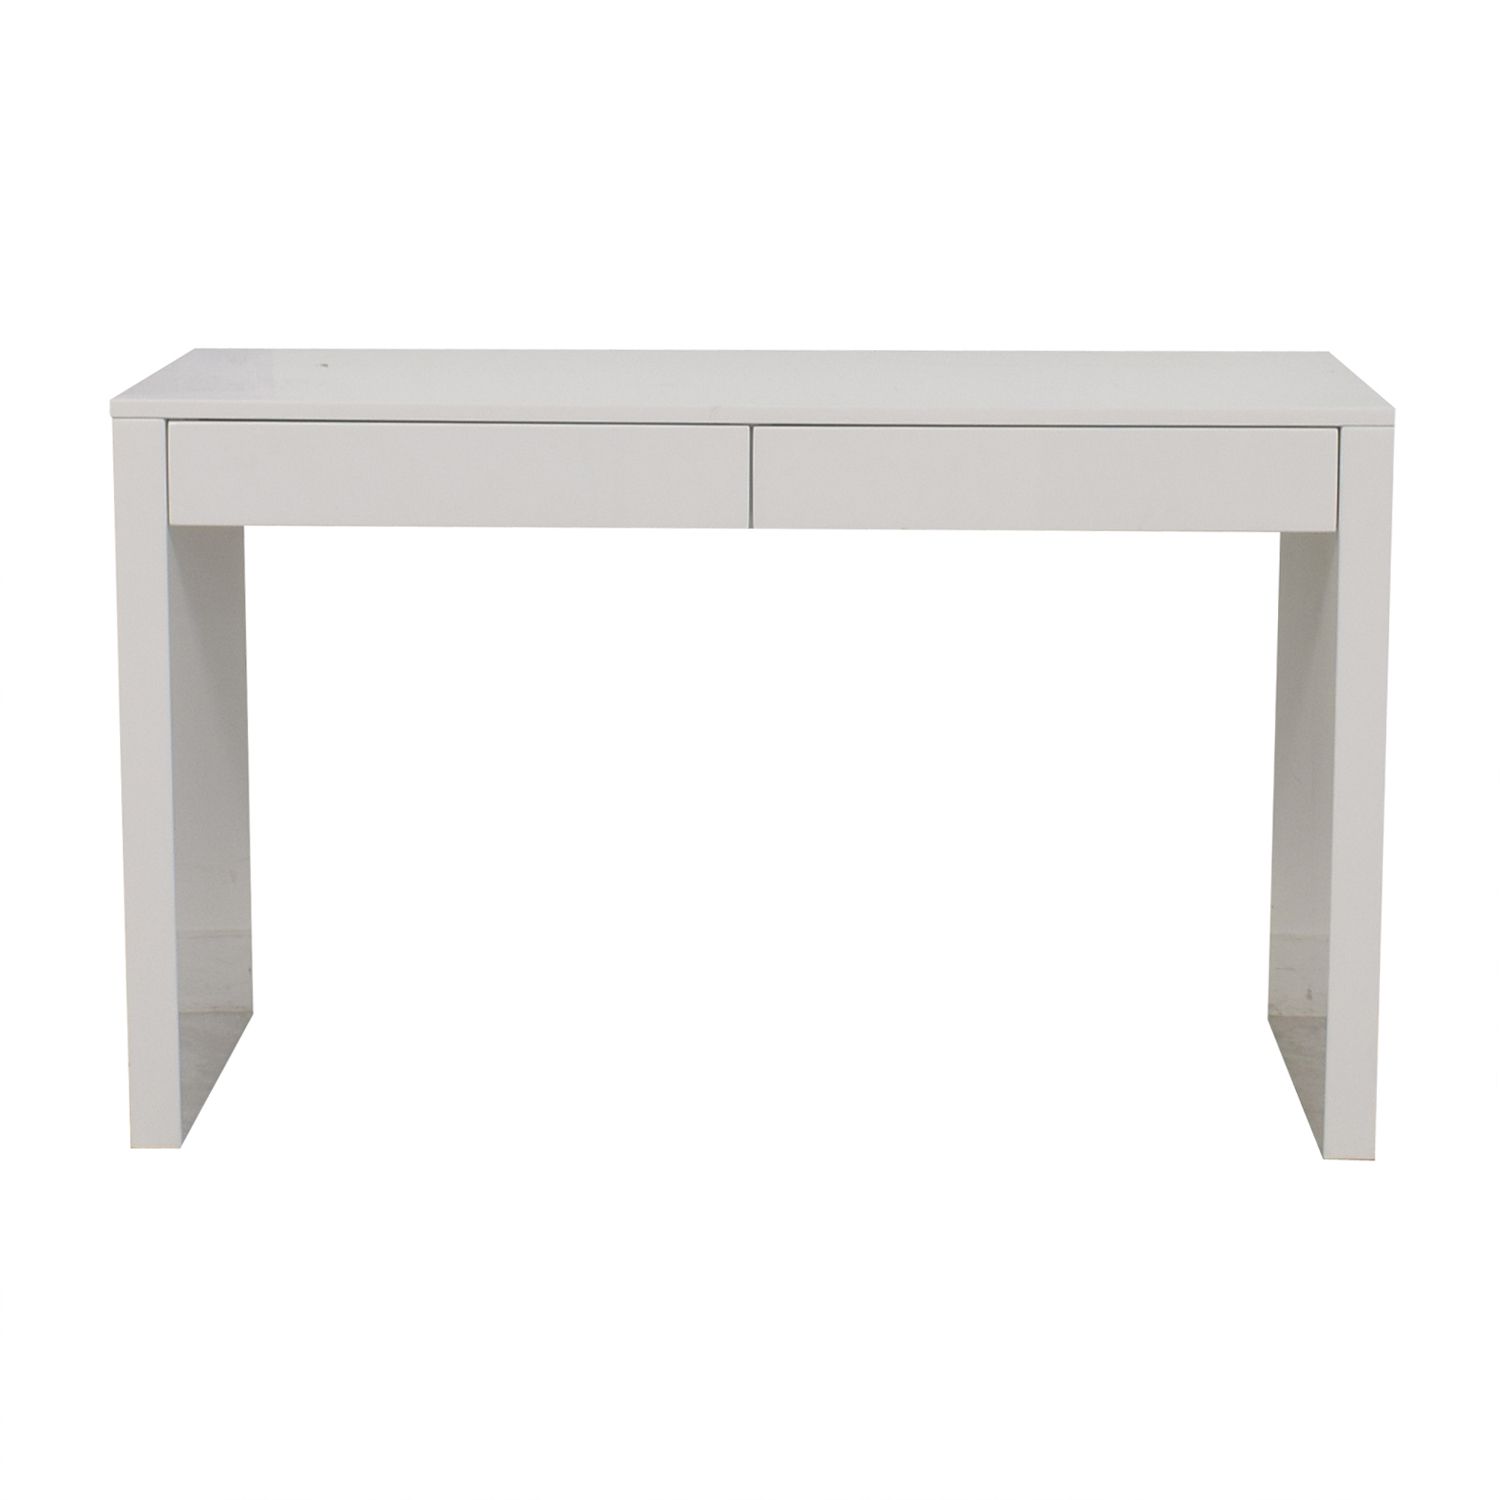 [%72% Off – Cb2 Cb2 Runway White Lacquer Desk / Tables In Latest White Lacquer And Brown Wood Desks|white Lacquer And Brown Wood Desks With Regard To Well Known 72% Off – Cb2 Cb2 Runway White Lacquer Desk / Tables|preferred White Lacquer And Brown Wood Desks With 72% Off – Cb2 Cb2 Runway White Lacquer Desk / Tables|most Current 72% Off – Cb2 Cb2 Runway White Lacquer Desk / Tables Intended For White Lacquer And Brown Wood Desks%] (View 12 of 15)